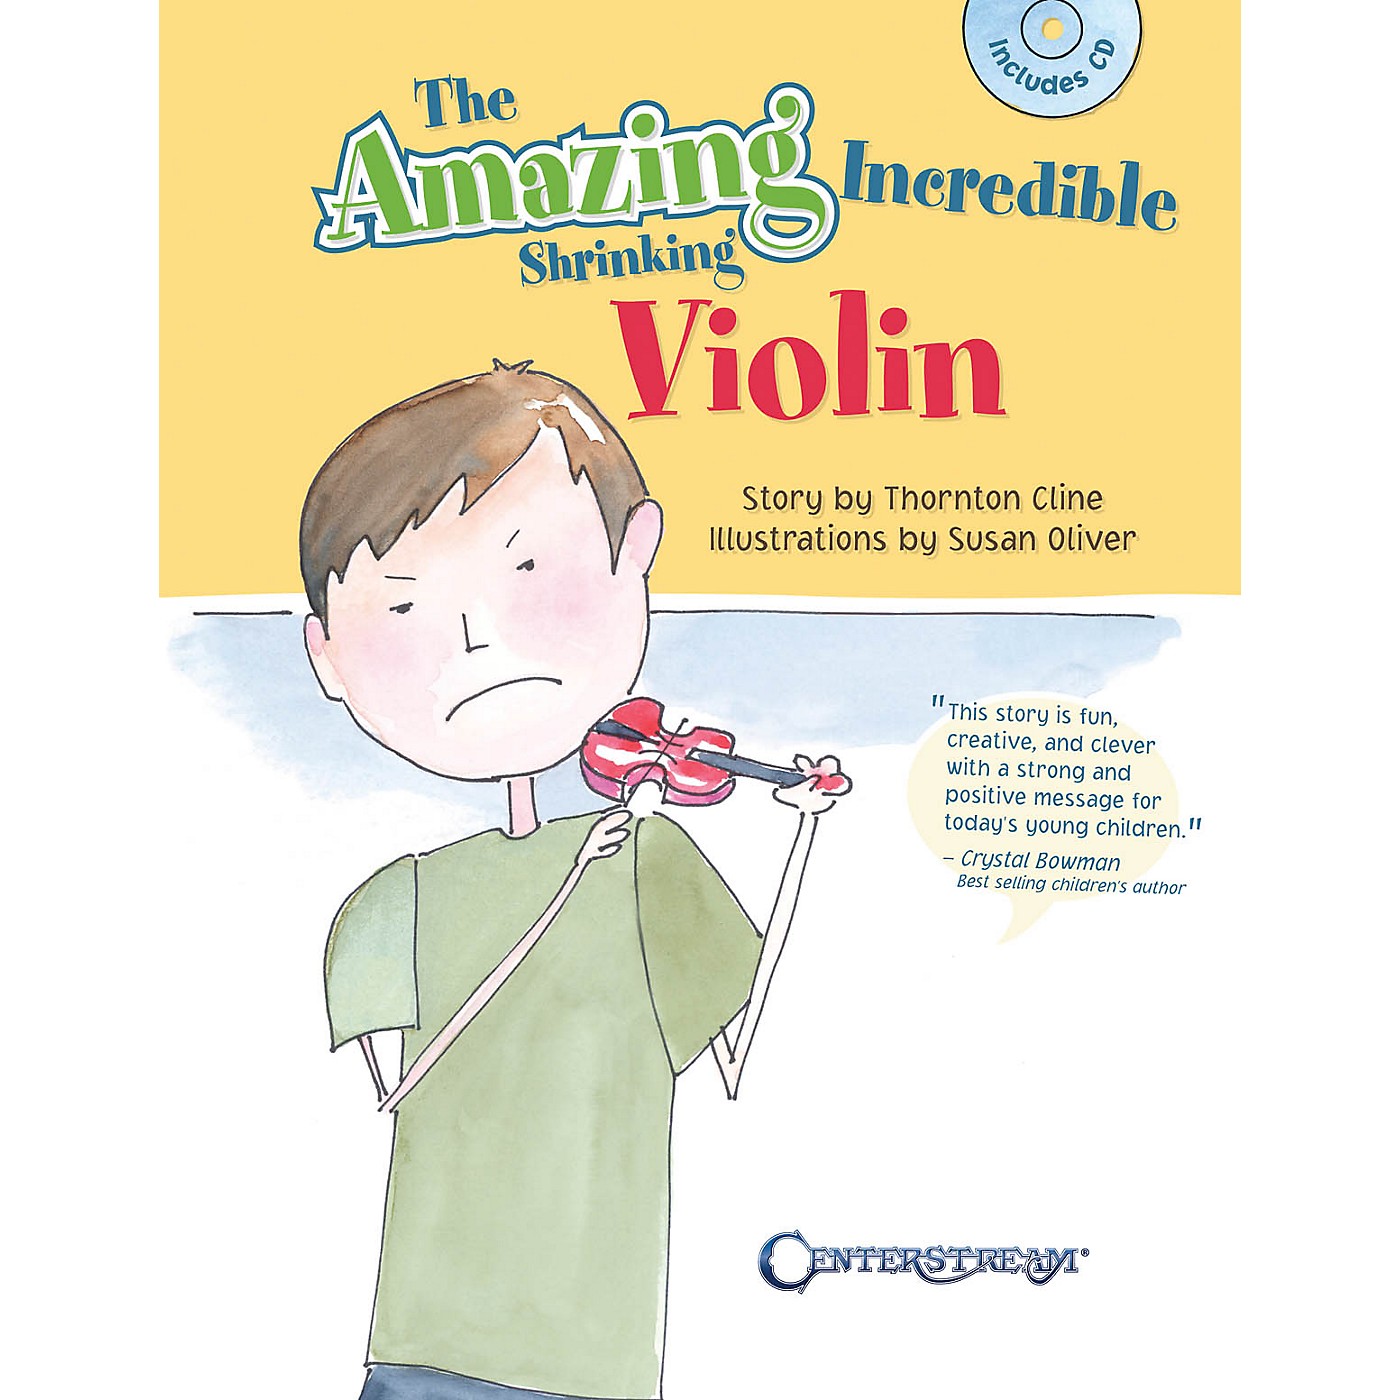 Centerstream Publishing The Amazing Incredible Shrinking Violin - Spanish Edition Book Series Softcover Written by Thornton Cline thumbnail